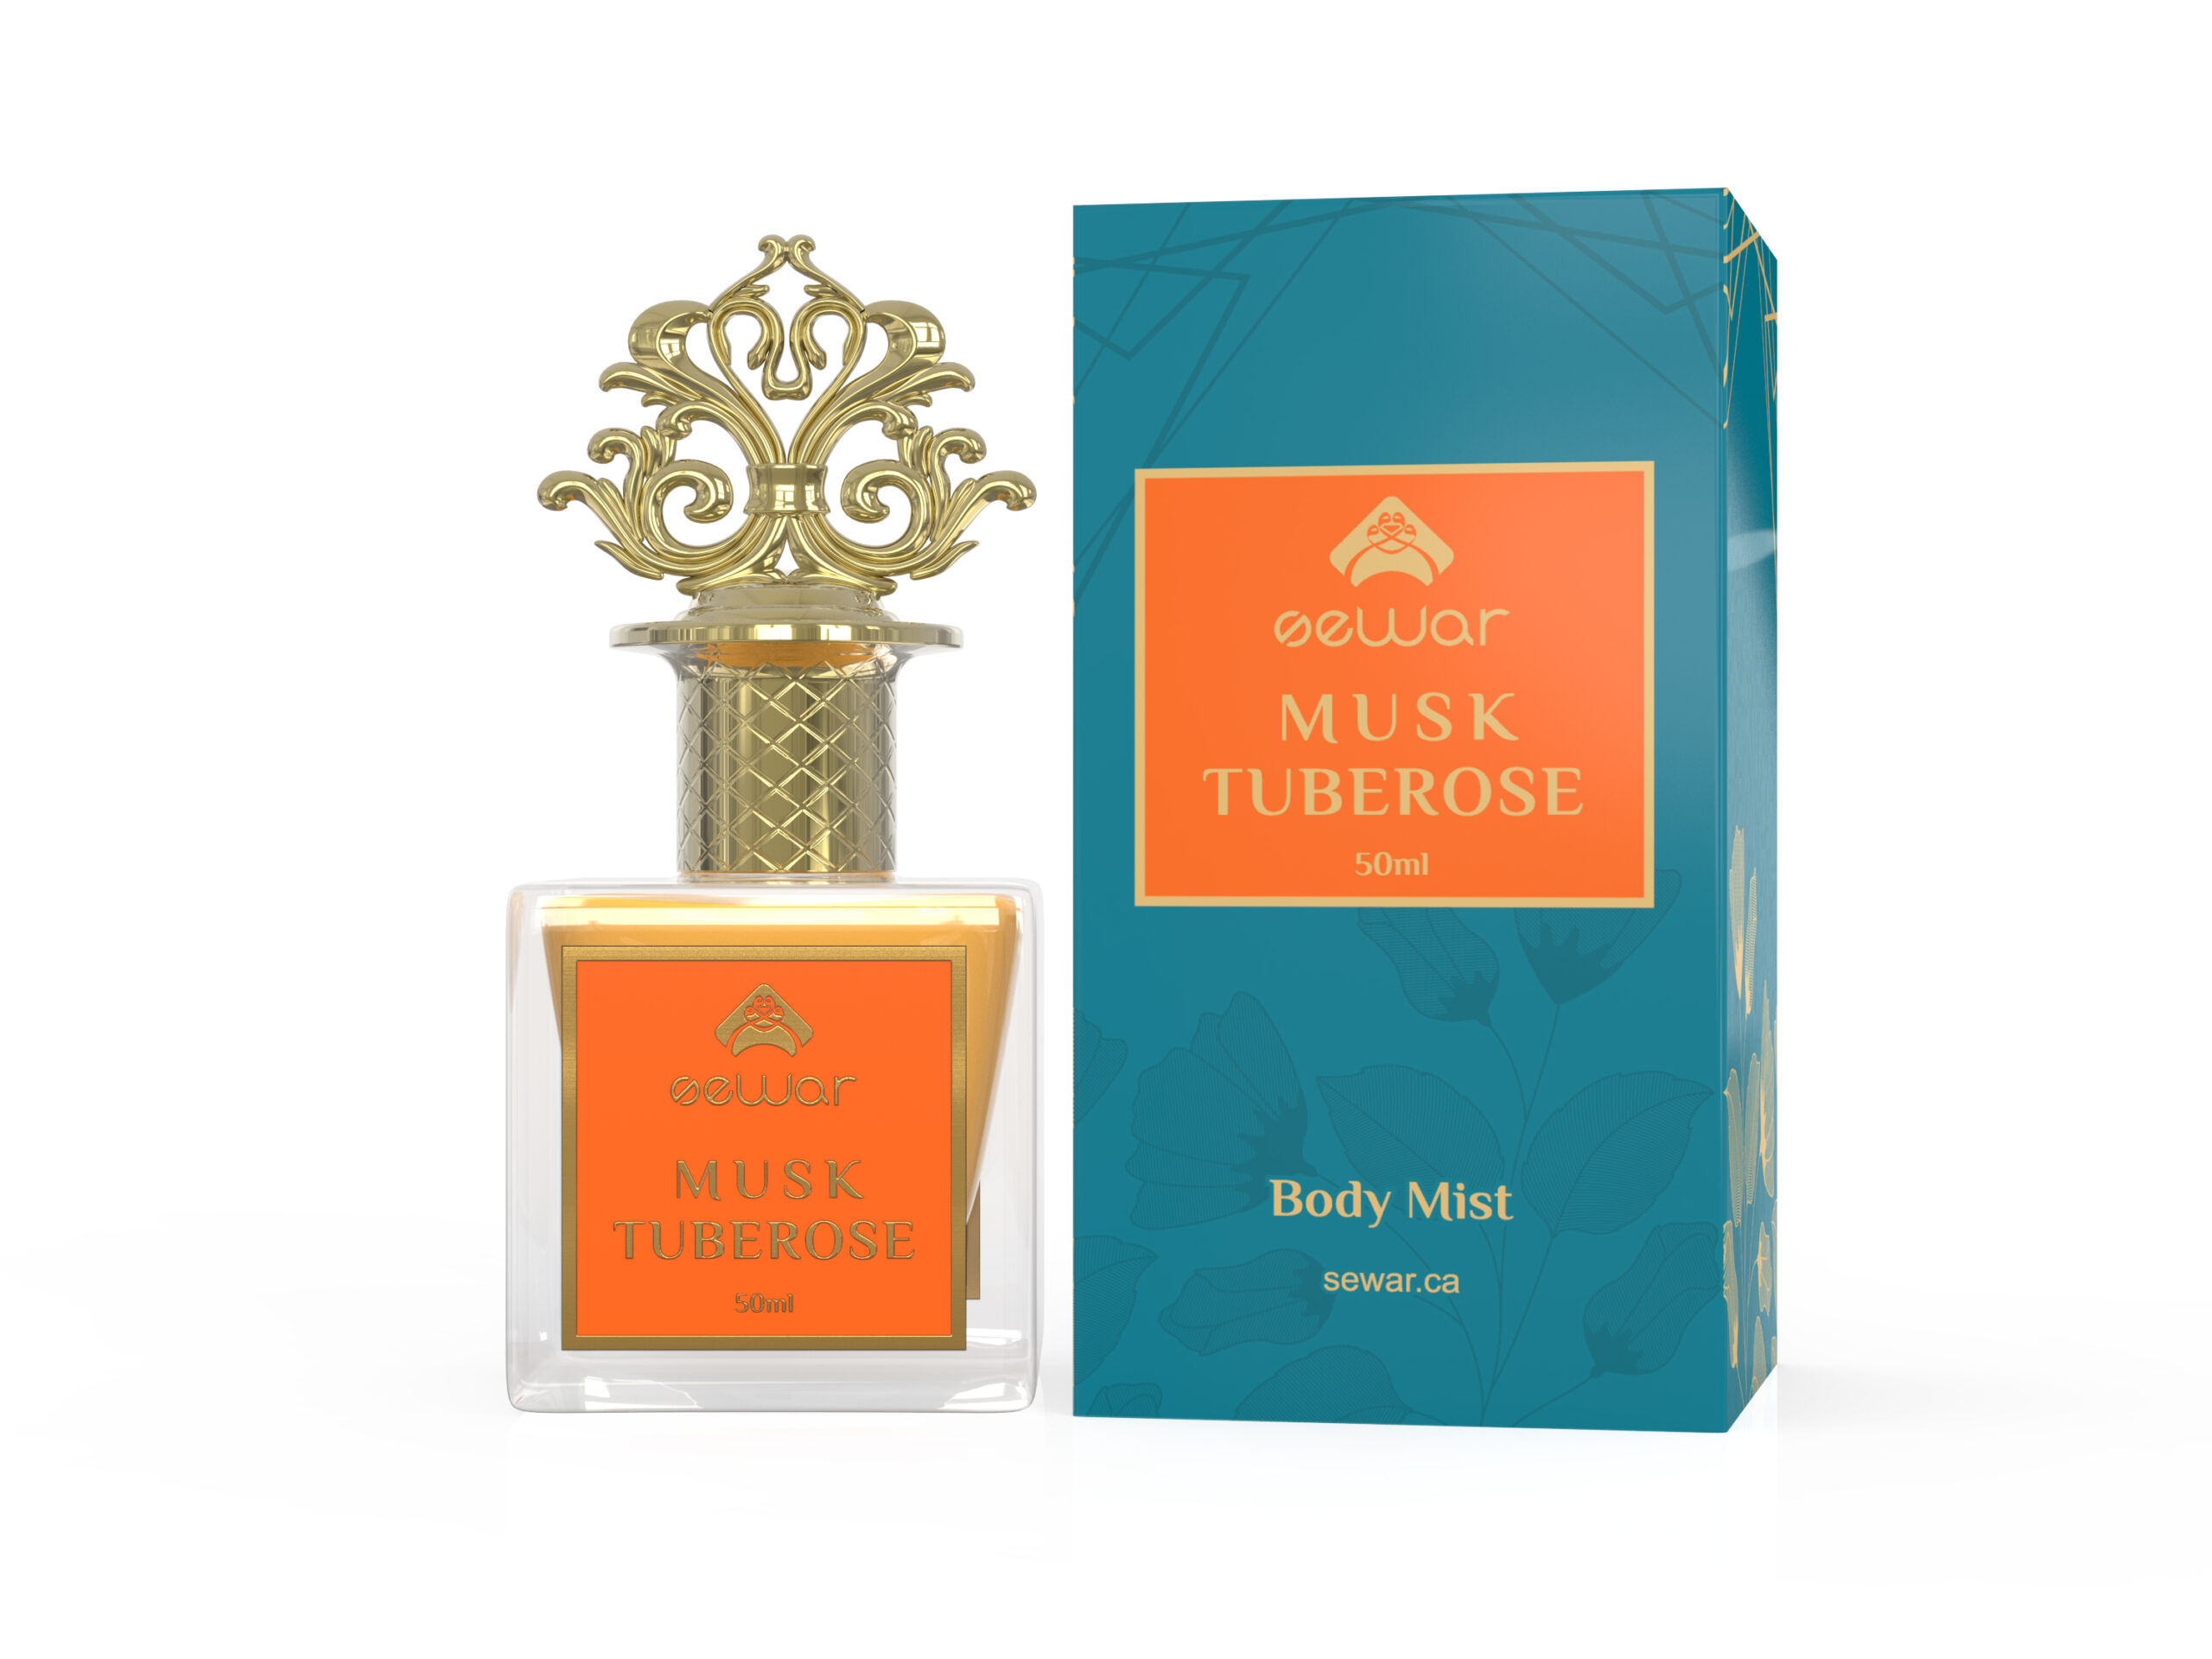 Tuberose Musk Body Mist by Sewar with Exotic Tuberose and Soft Musk Notes